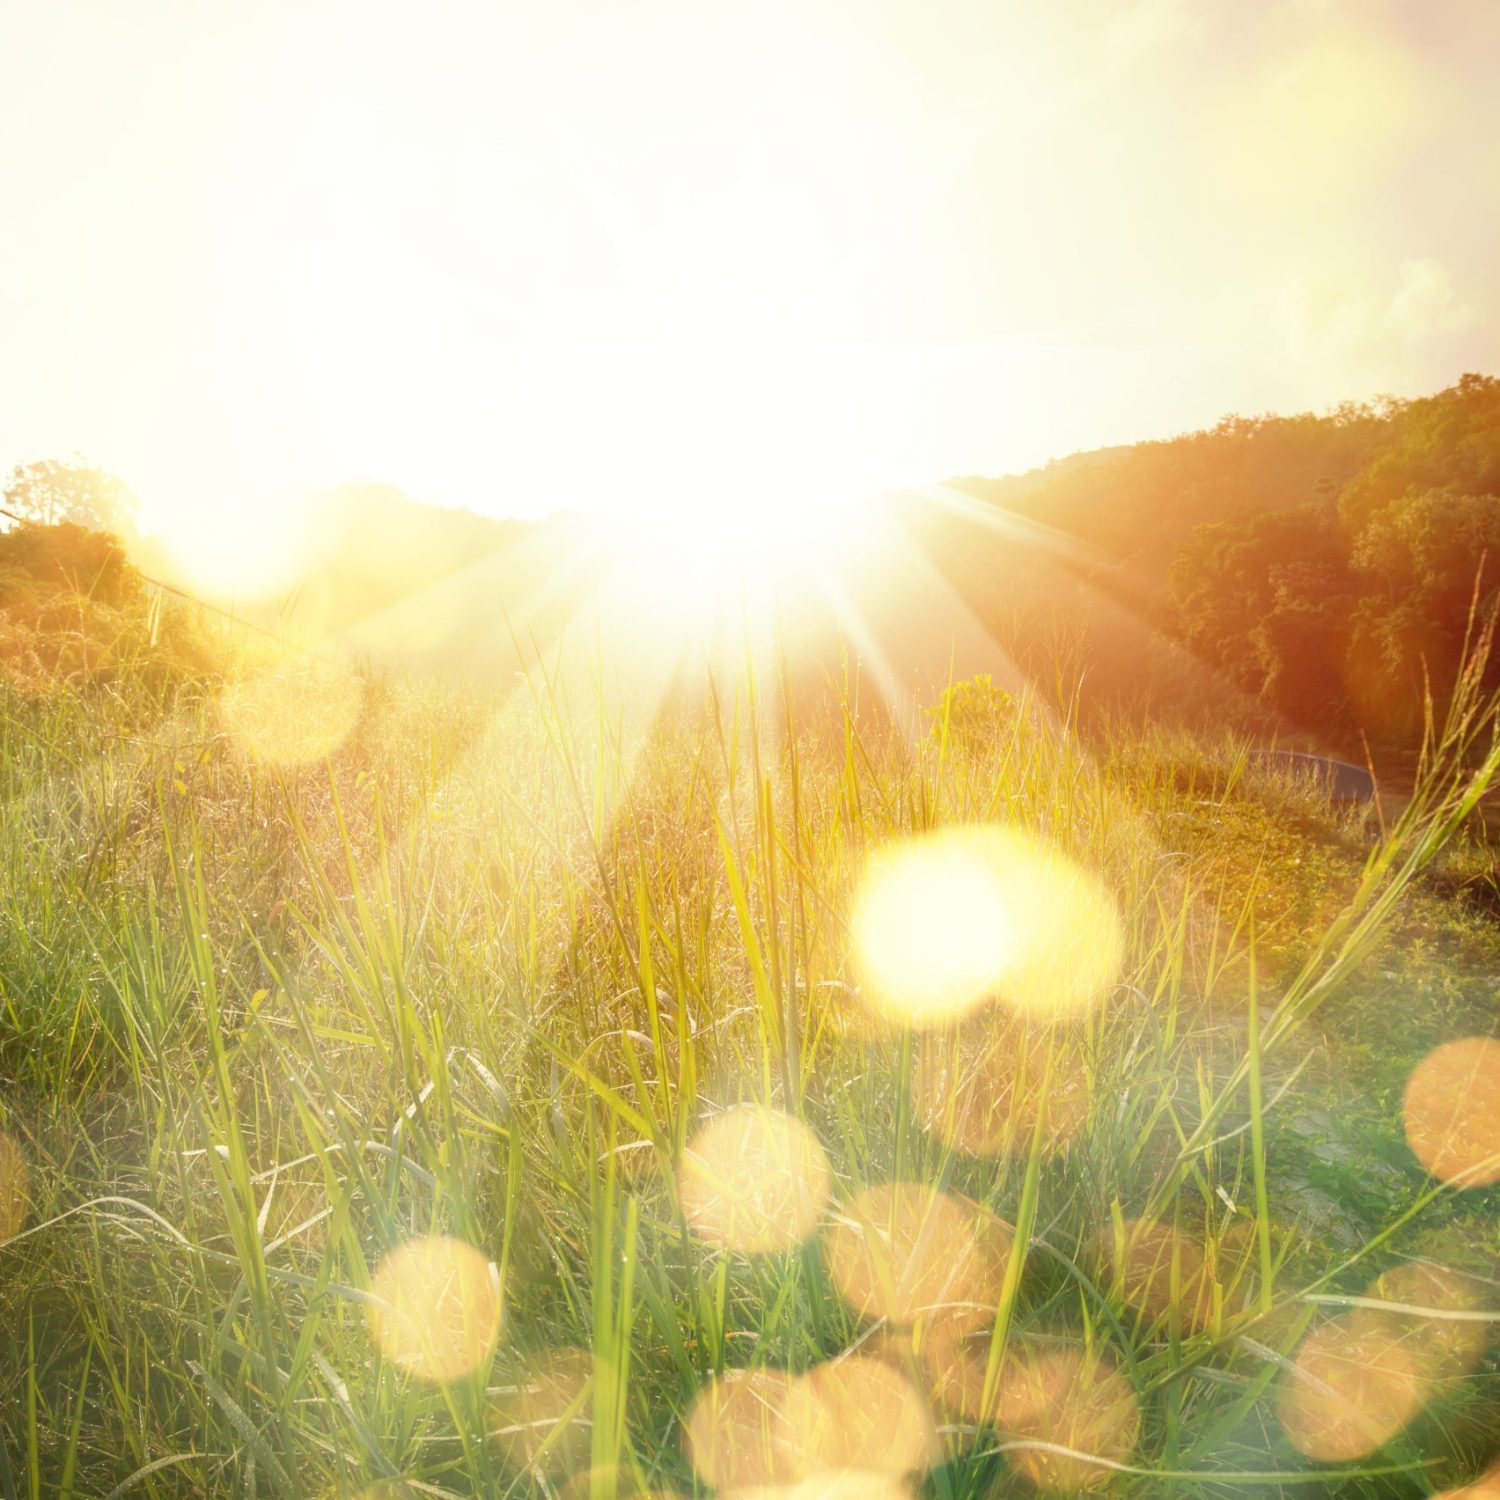 Meadow landscape refreshment with sunray and golden bokeh.
Beautiful sunrise in the mountain.